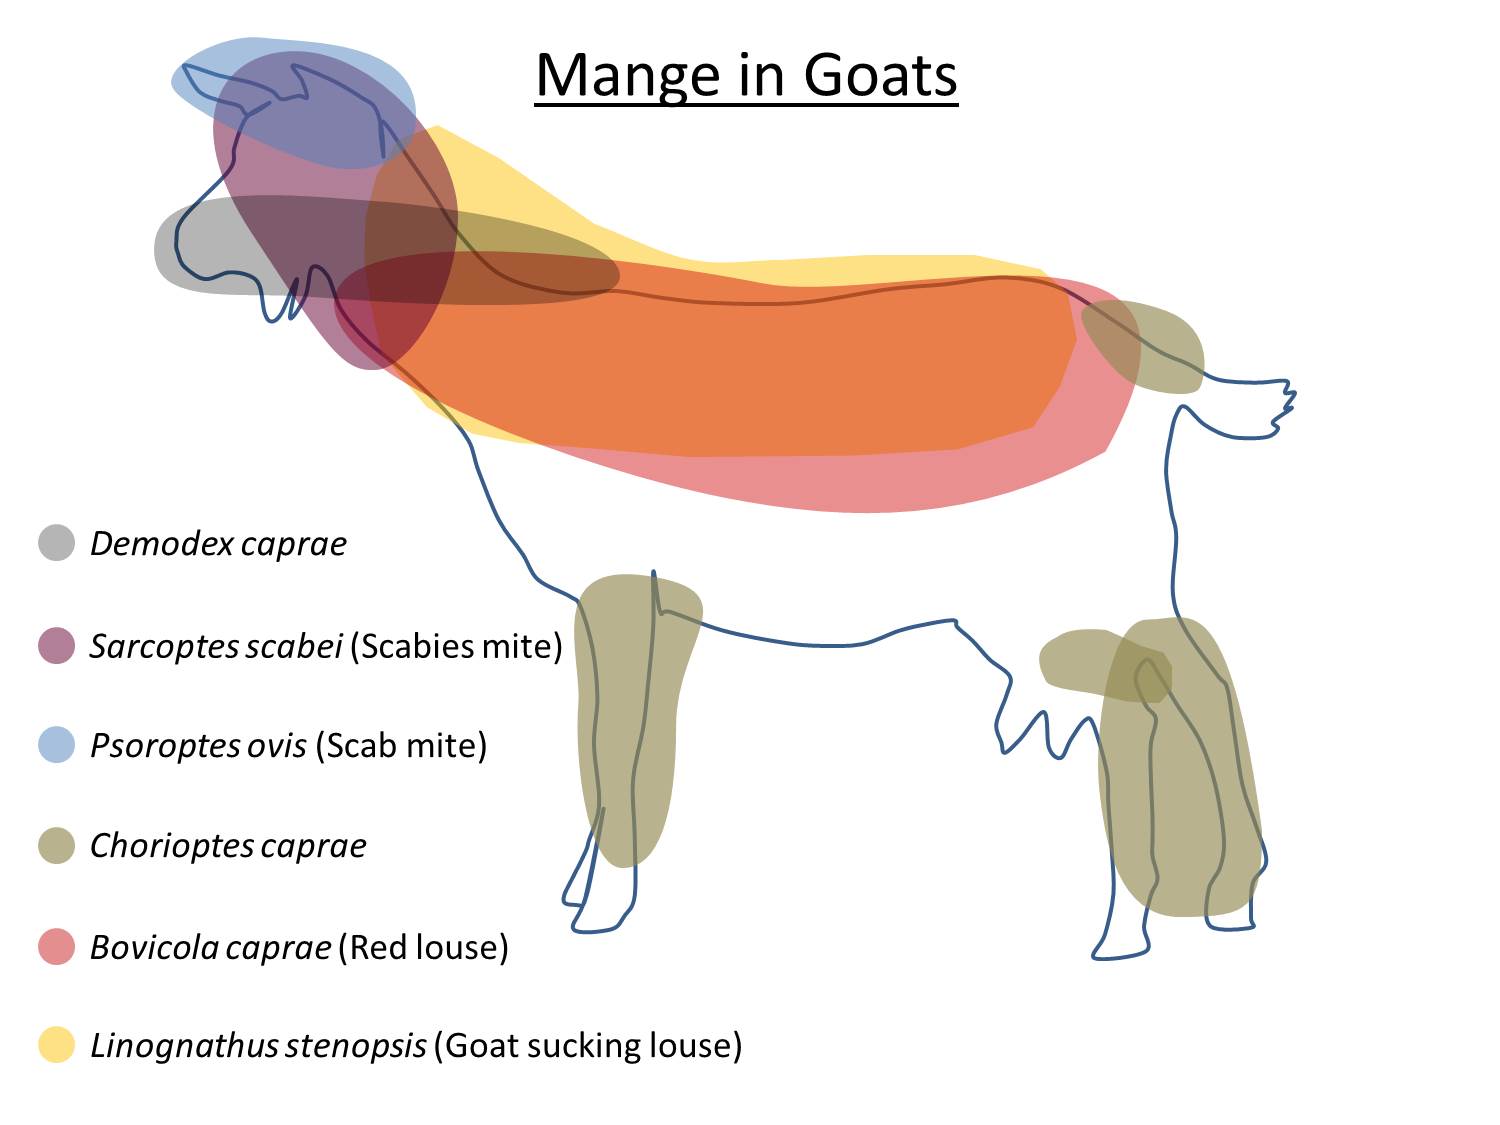 Mange in Goats - locations